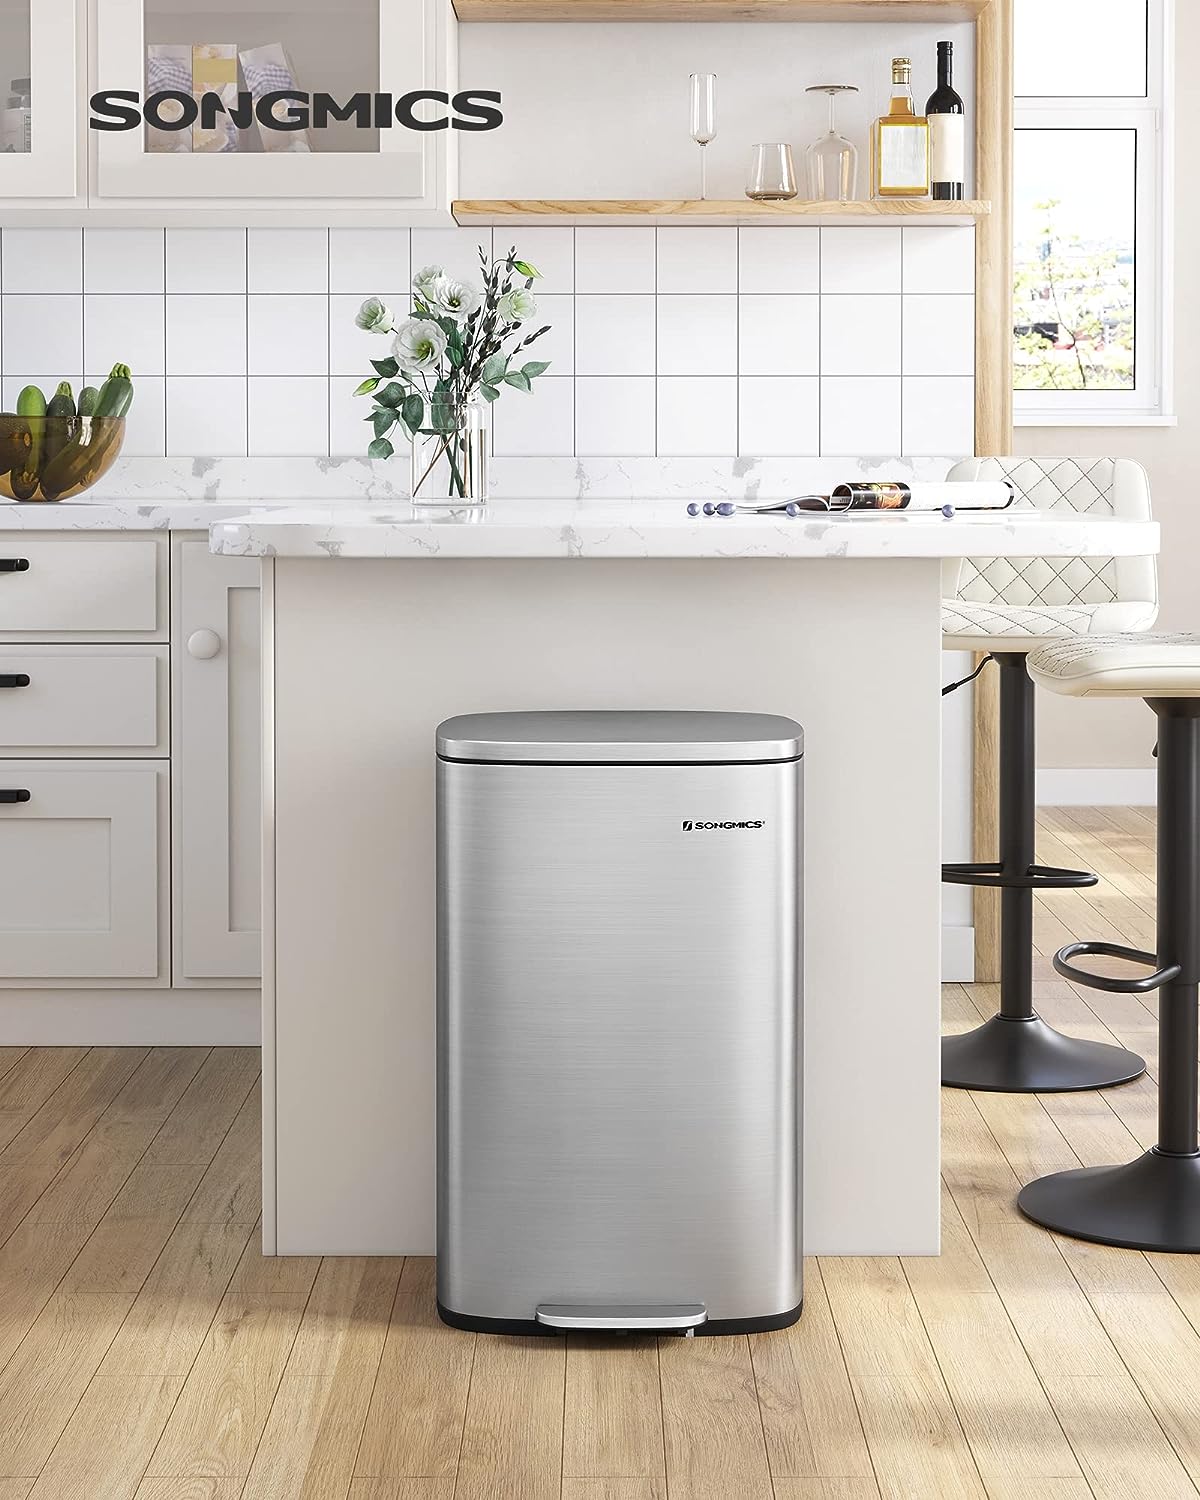 https://bigbigmart.com/wp-content/uploads/2023/11/SONGMICS-13-Gallon-Trash-Can-Stainless-Steel-Kitchen-Garbage-Can-Recycling-or-Waste-Bin-Soft-Close-Step-On-Pedal-Removable-Inner-Bucket-Silver-ULTB050E011.jpg